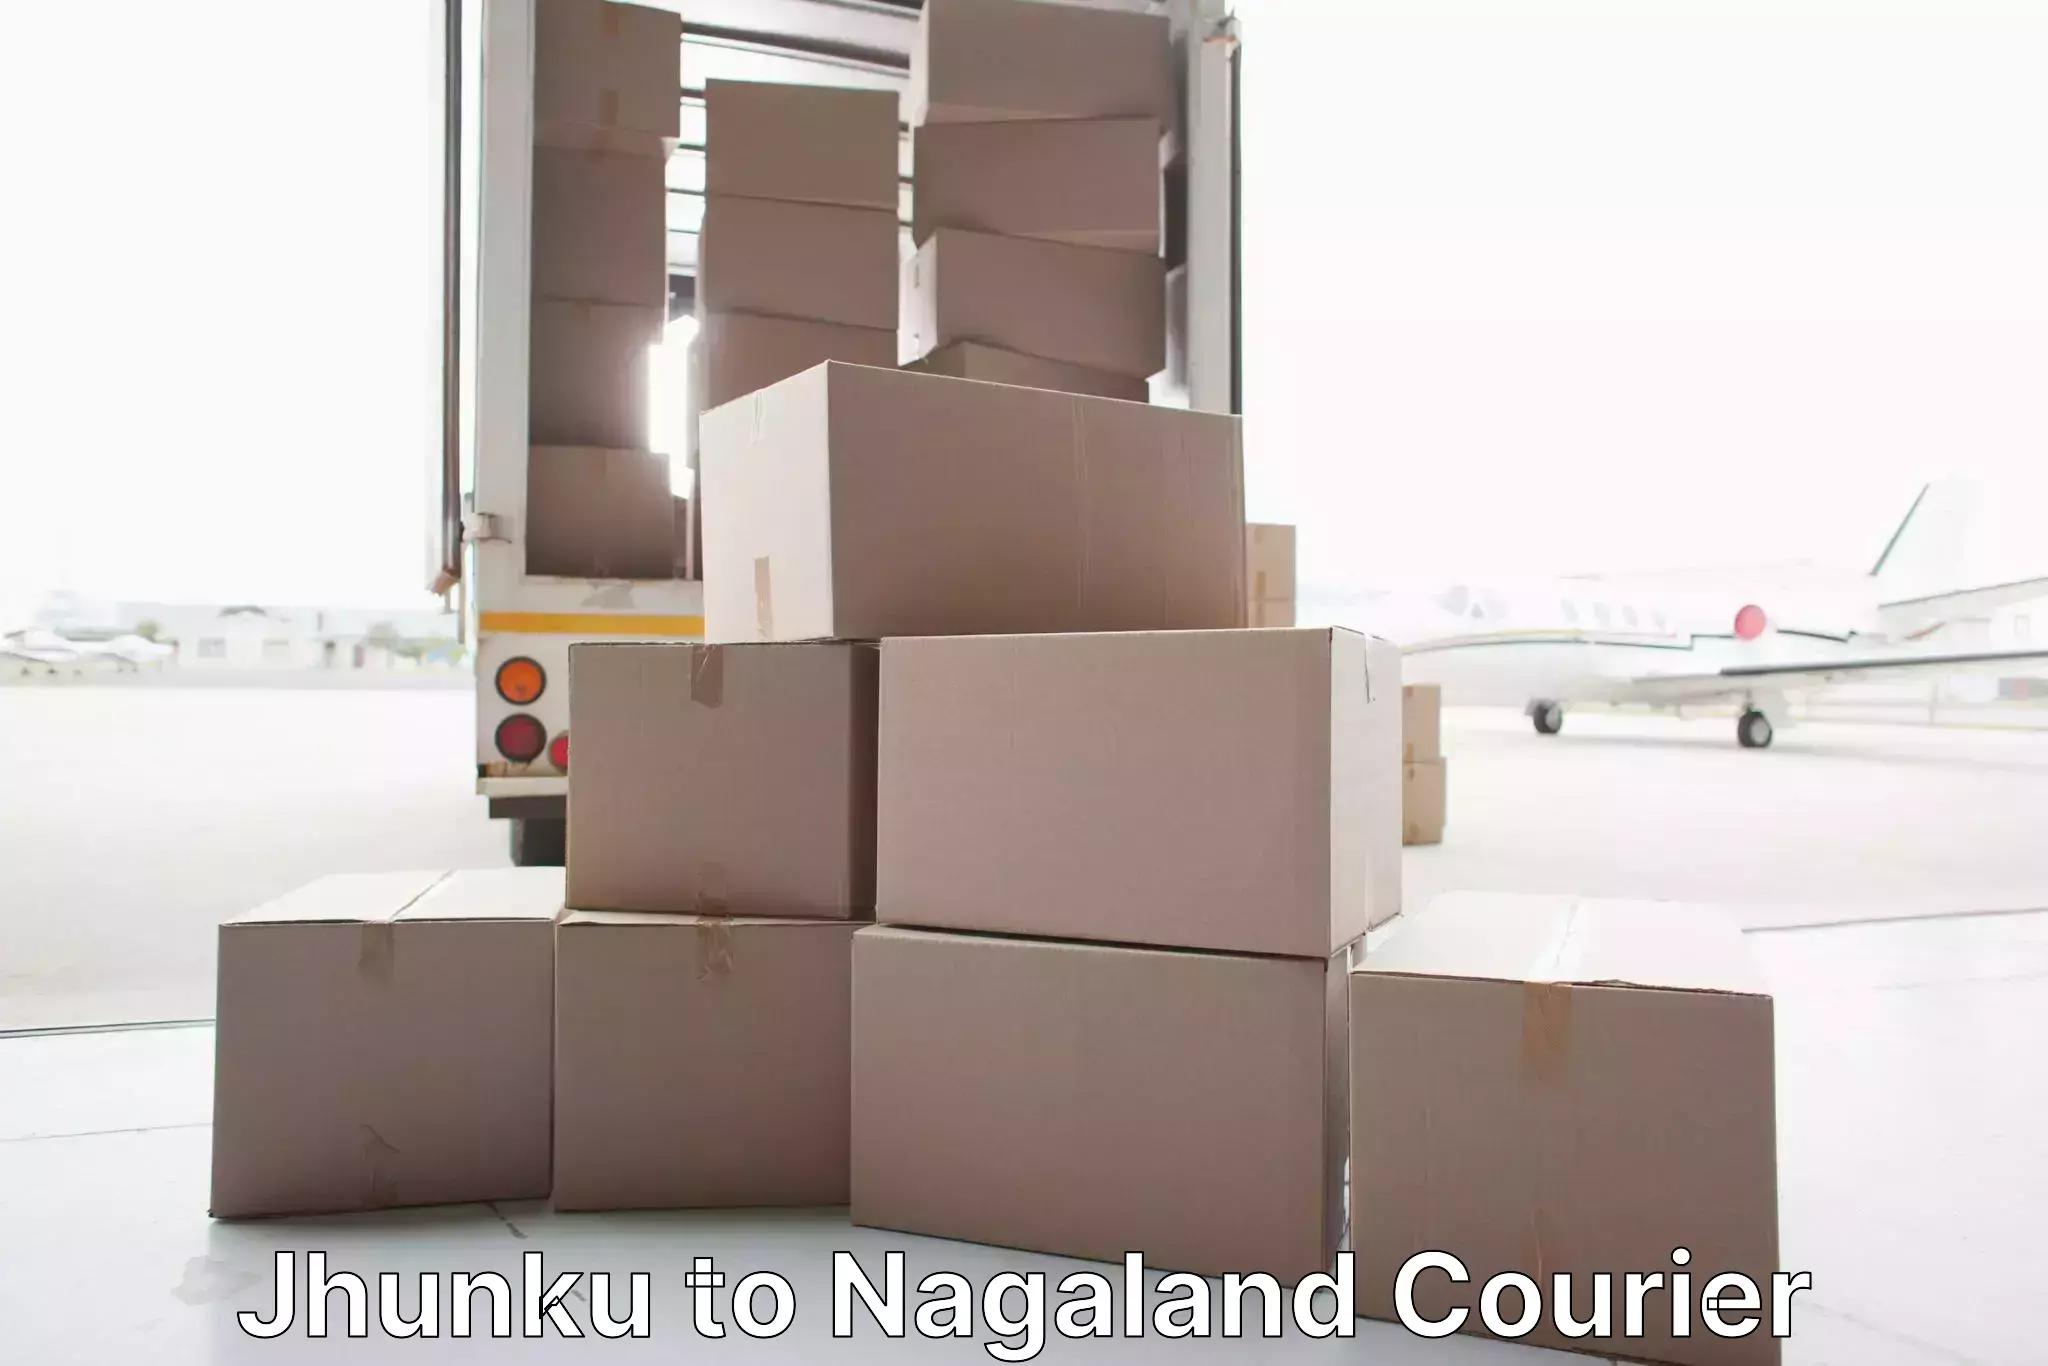 Moving and storage services Jhunku to Nagaland